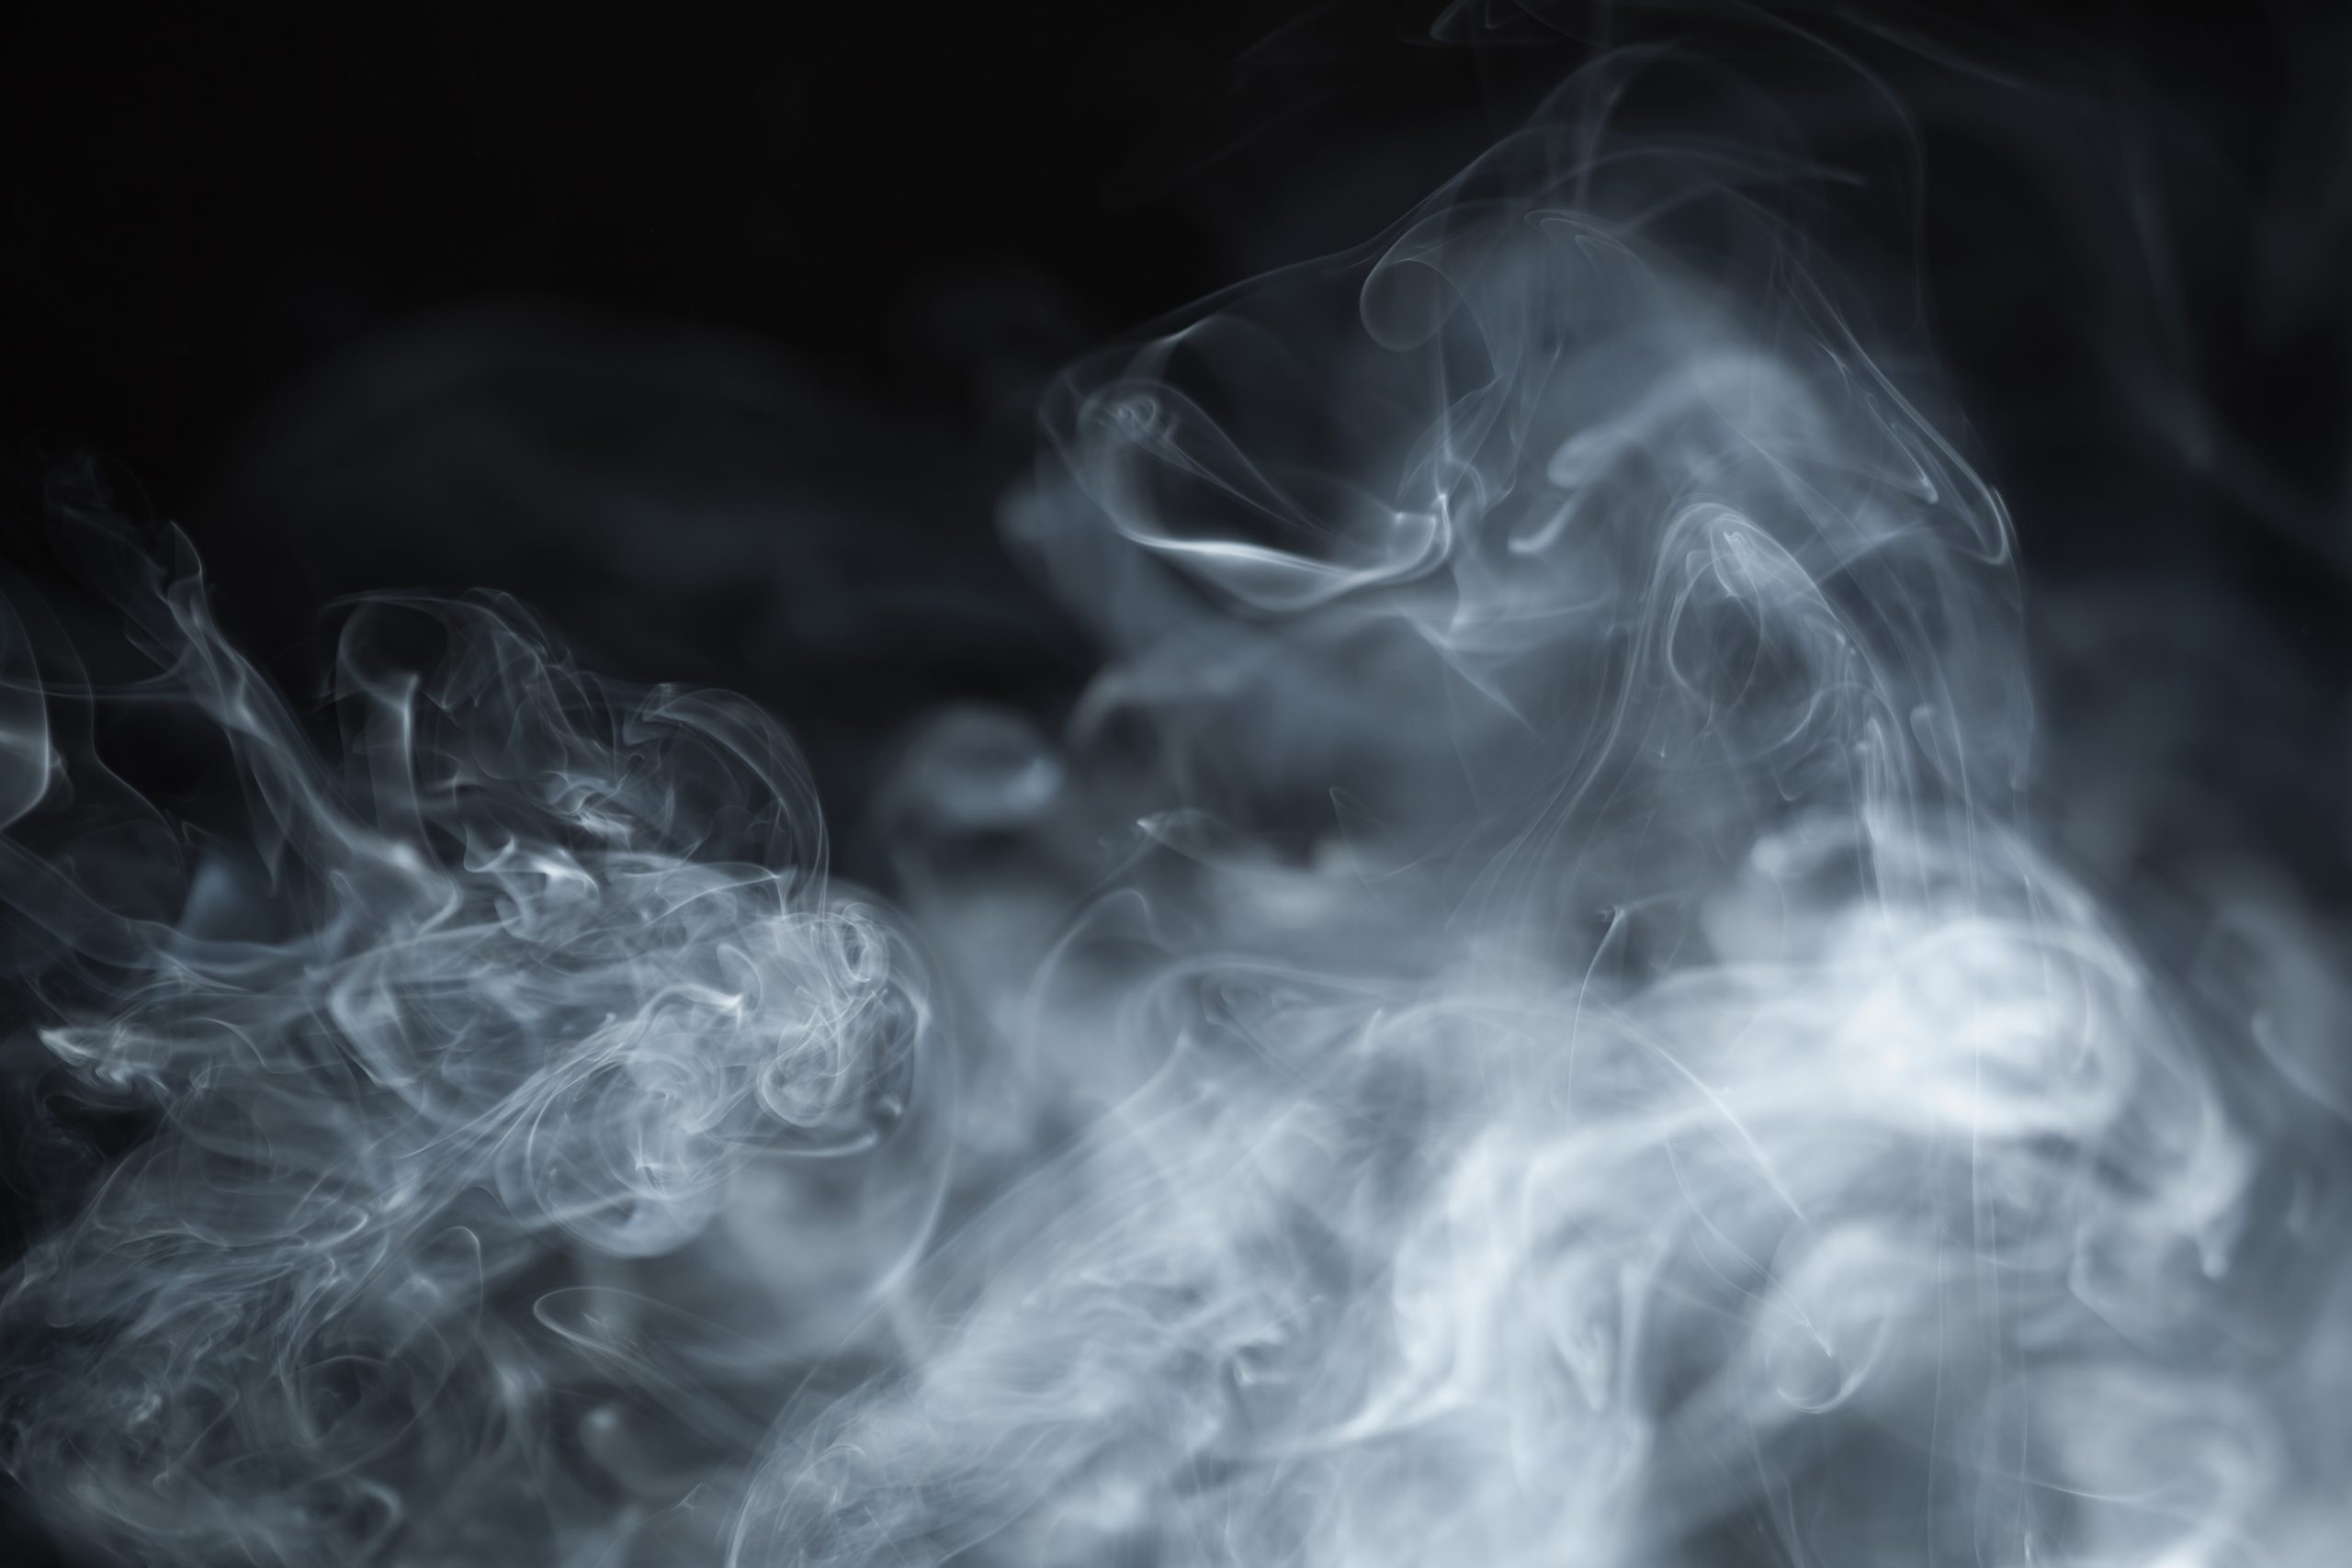 Smoking Herbs, Nicotine, Cannabis, and the controversial effects of Vaping